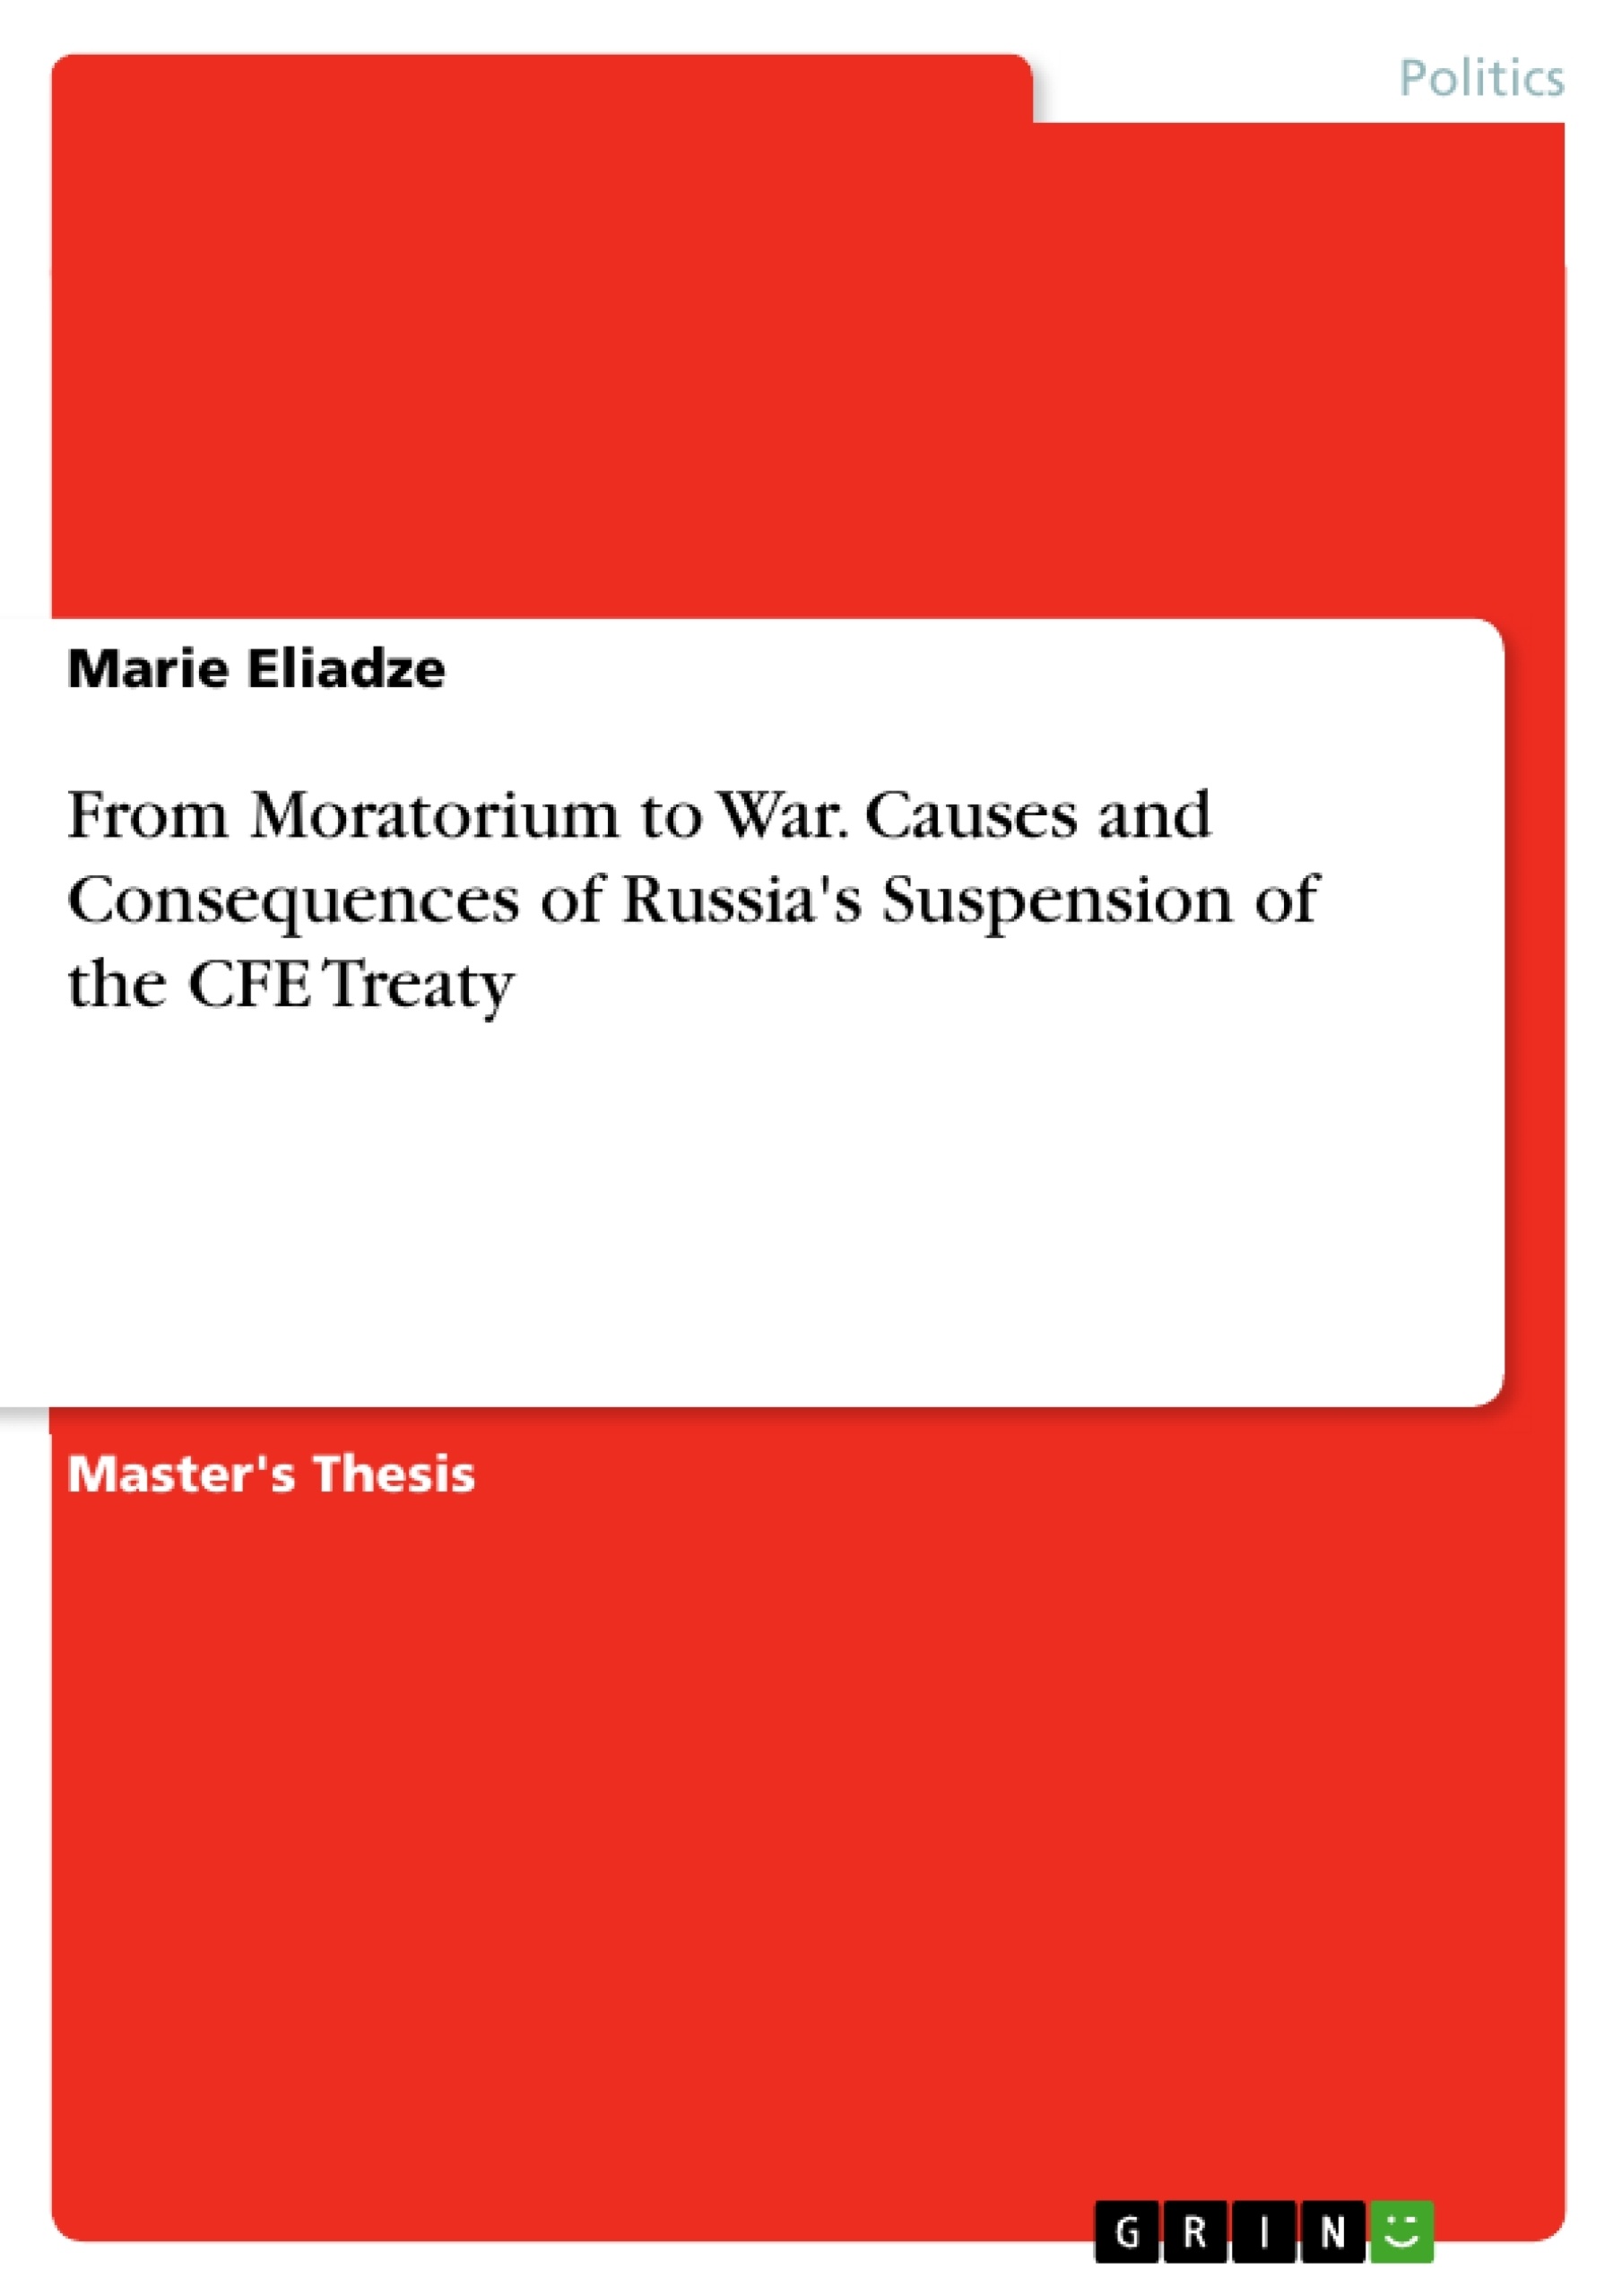 Título: From Moratorium to War. Causes and Consequences of Russia's Suspension of the  CFE Treaty